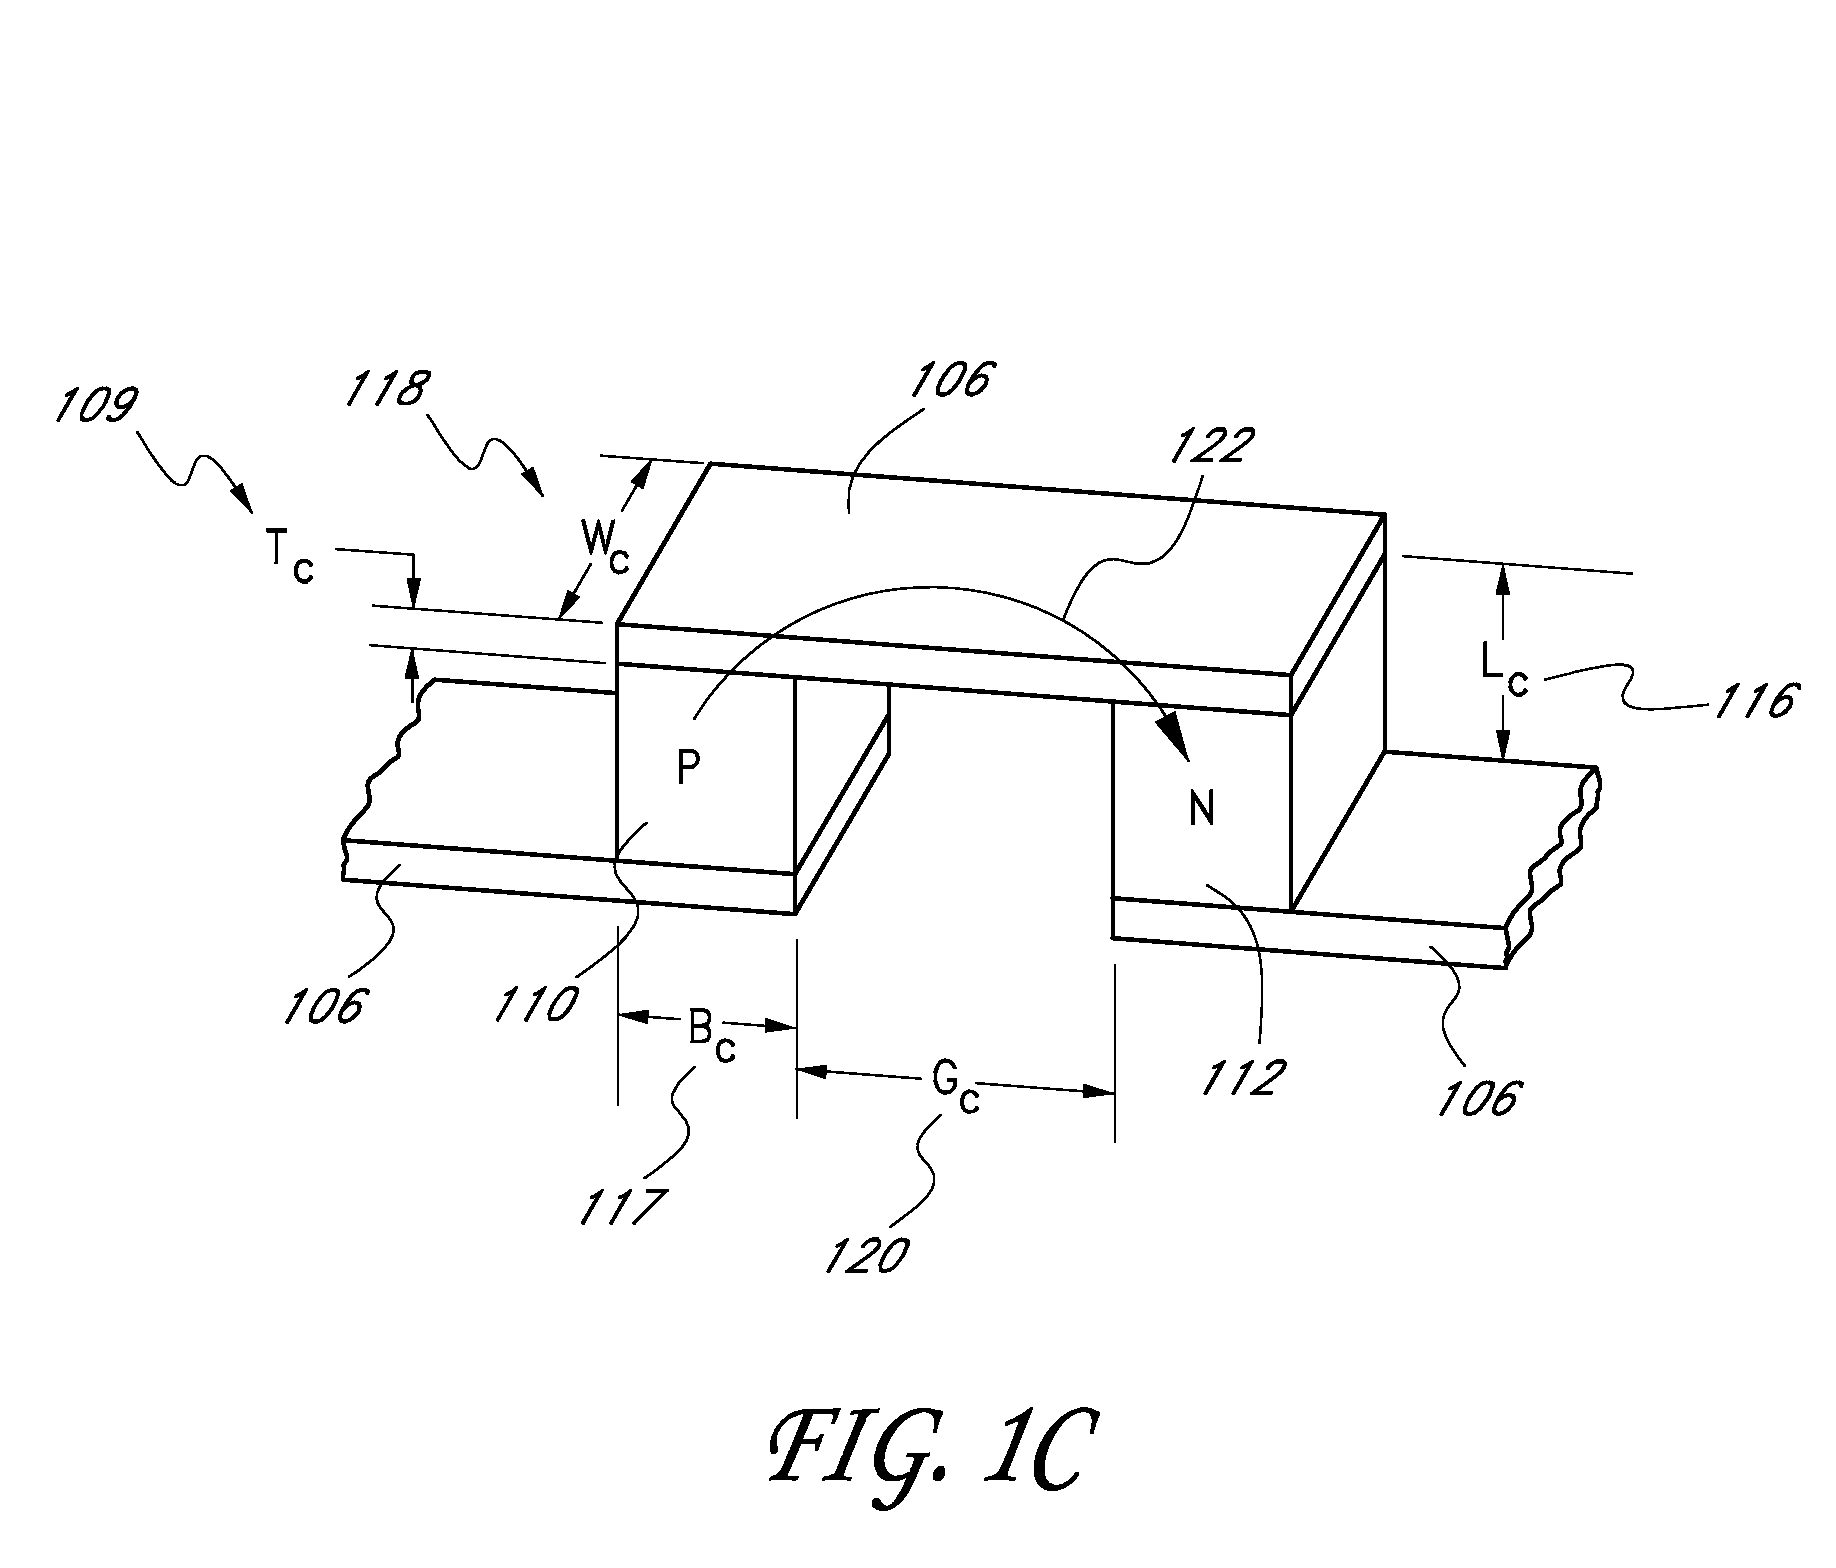 Thermoelectric power generating systems utilizing segmented thermoelectric elements